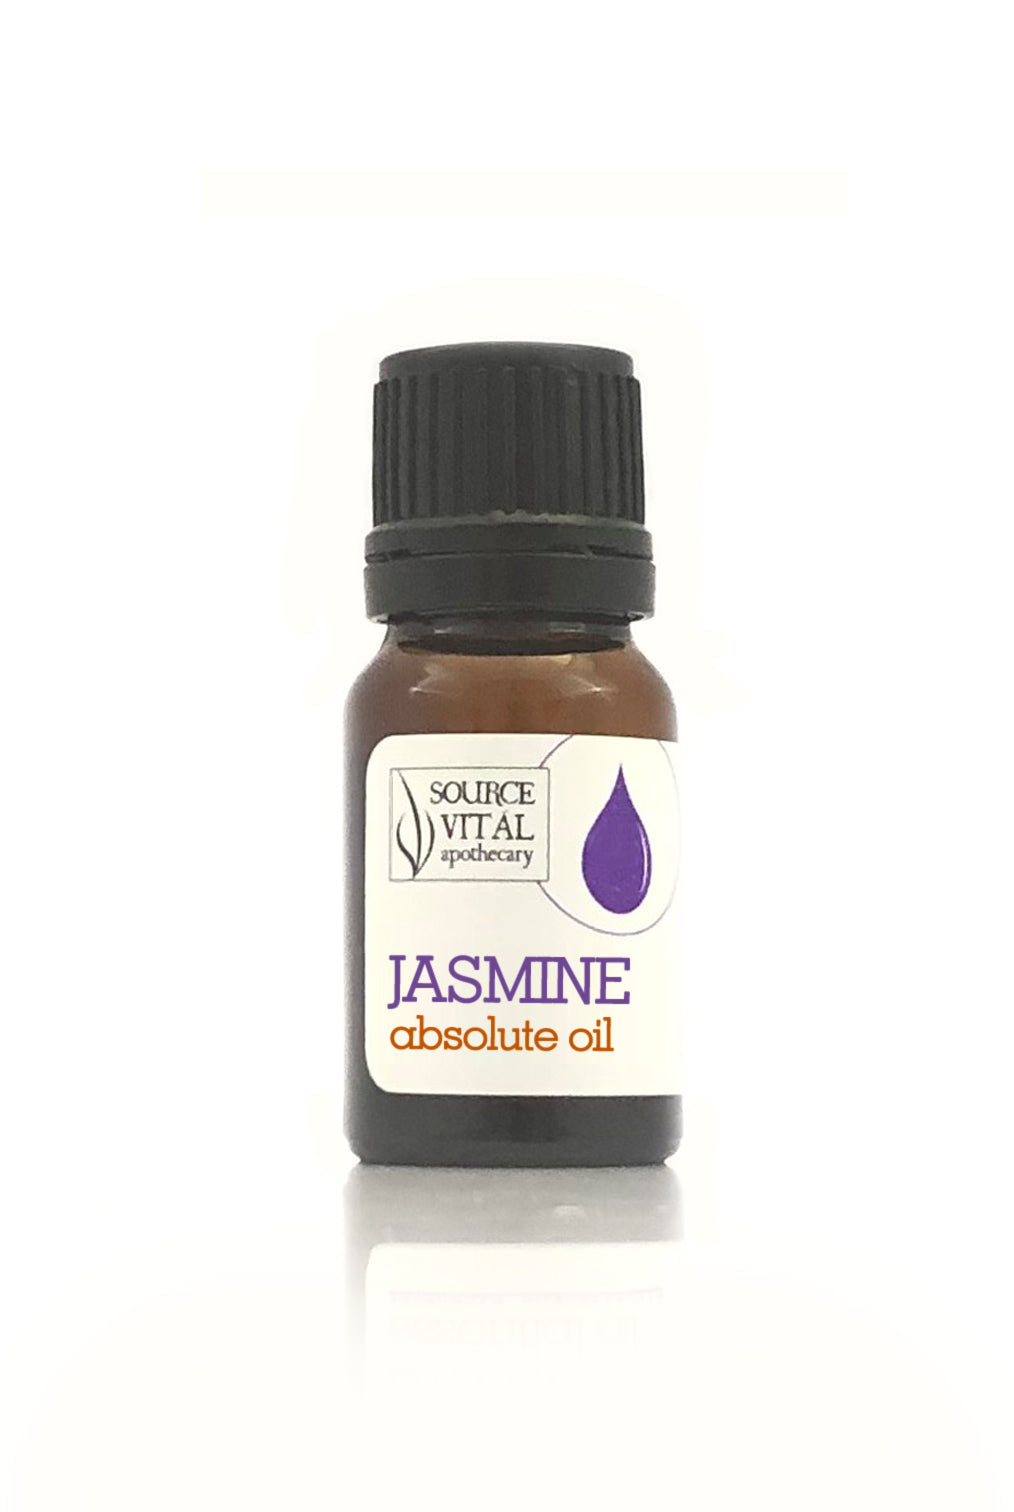 Jasmine Essential Oil - the perfect scent for your Valentine